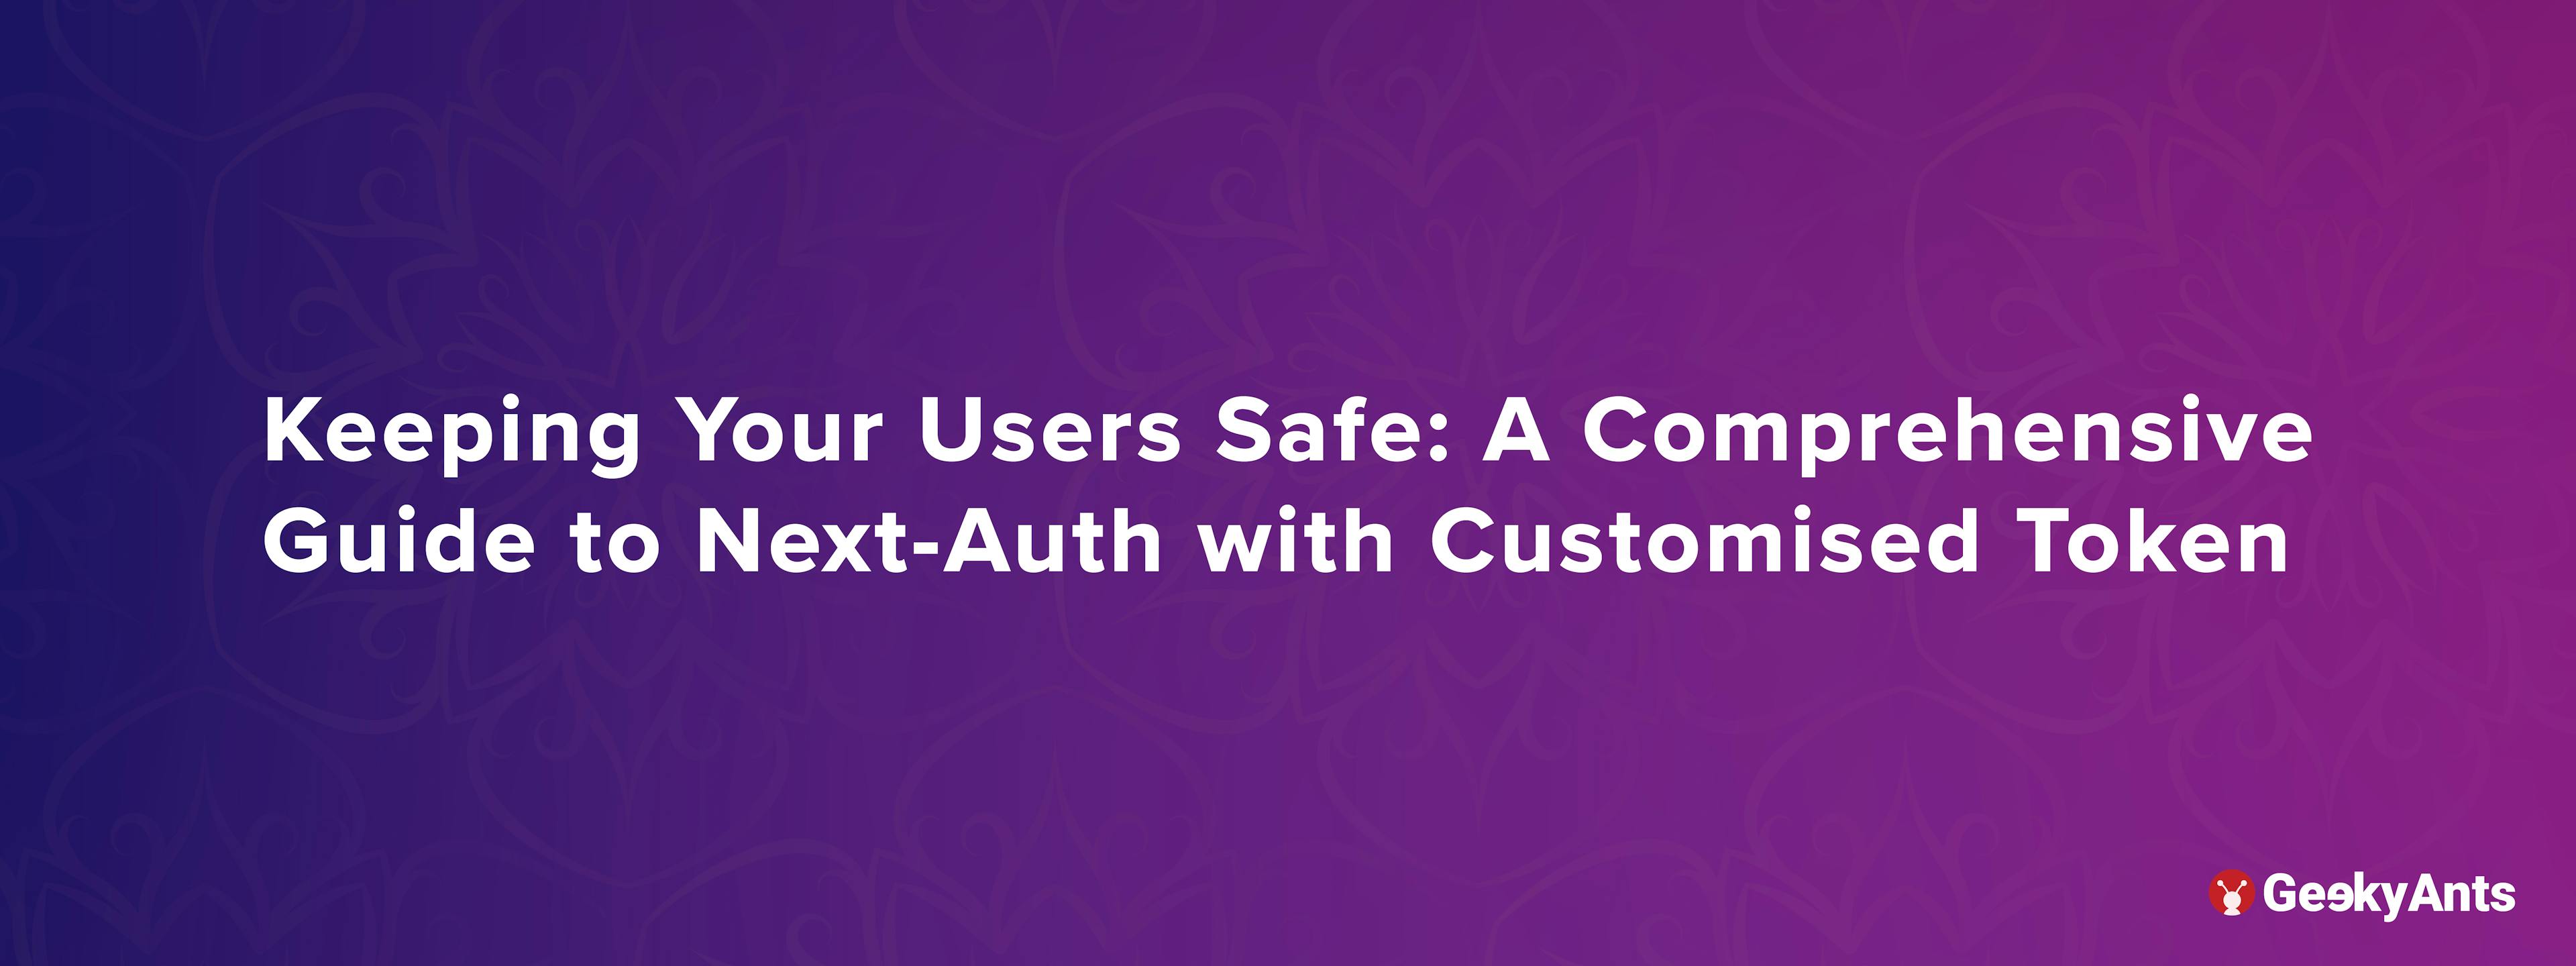 Keeping Your Users Safe: A Comprehensive Guide to Next-Auth with Customized Token